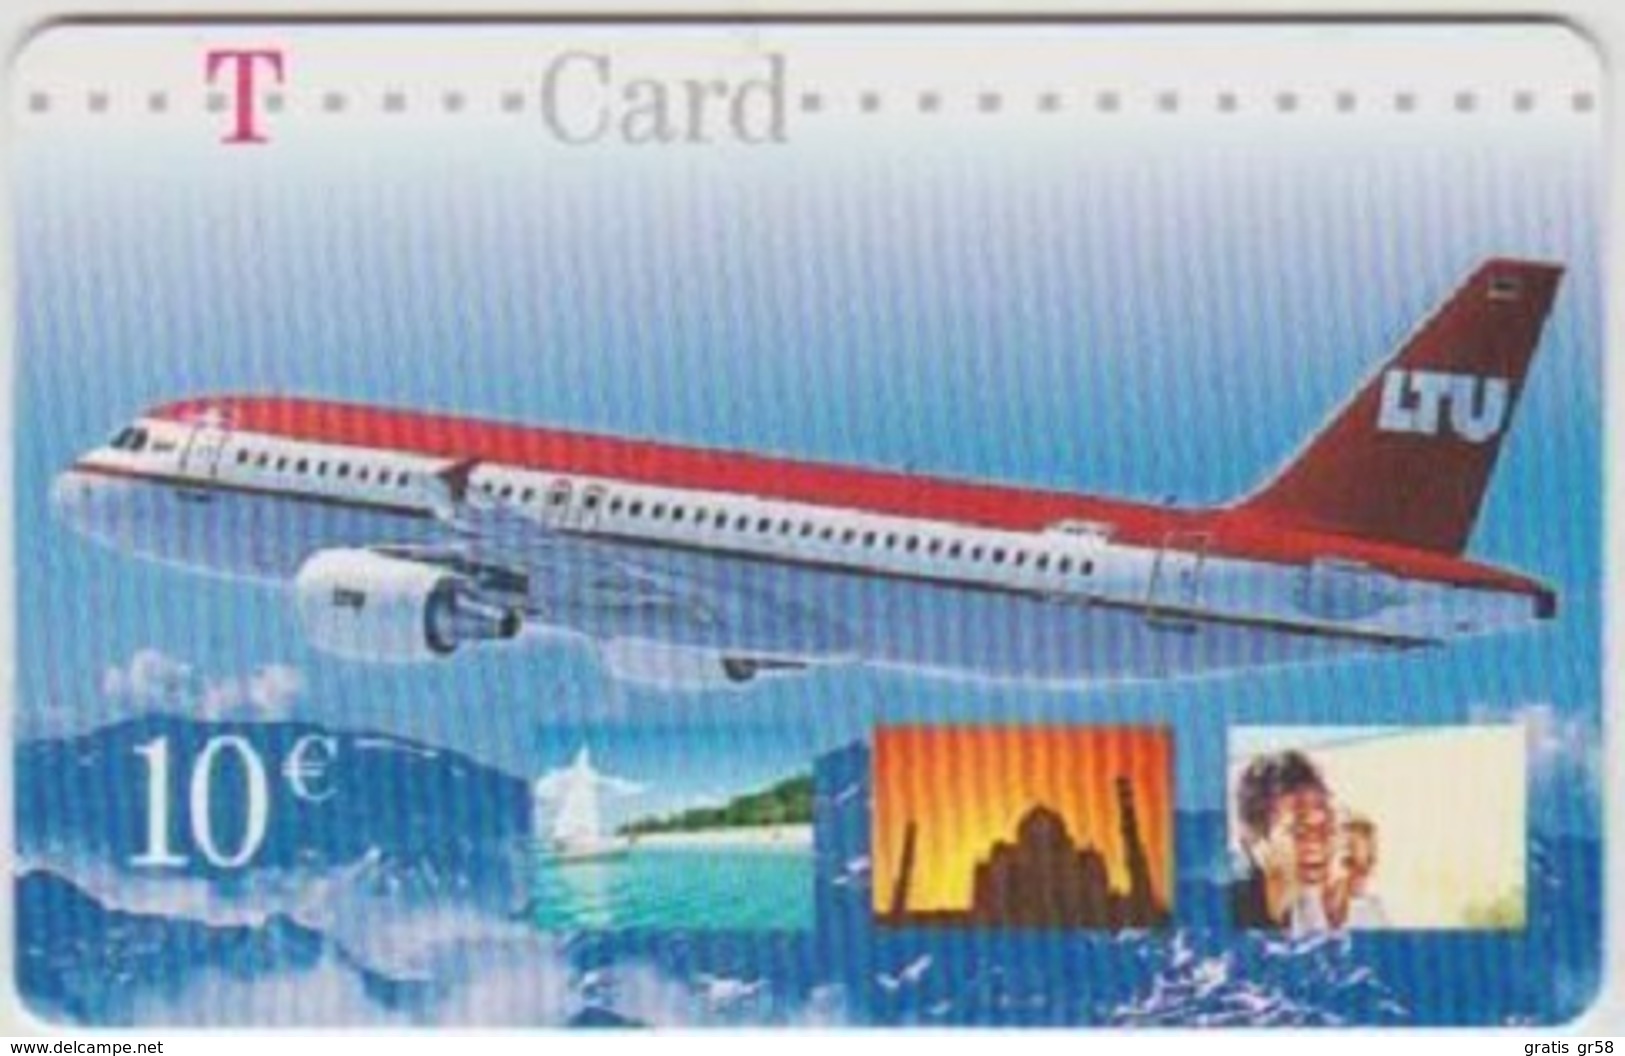 Germany - T-Card, TC K 02/02, Aircraft, Airlines, LTU (Airbus A.320-200), Exp 4/04, Used - [3] T-Pay  Micro-Money